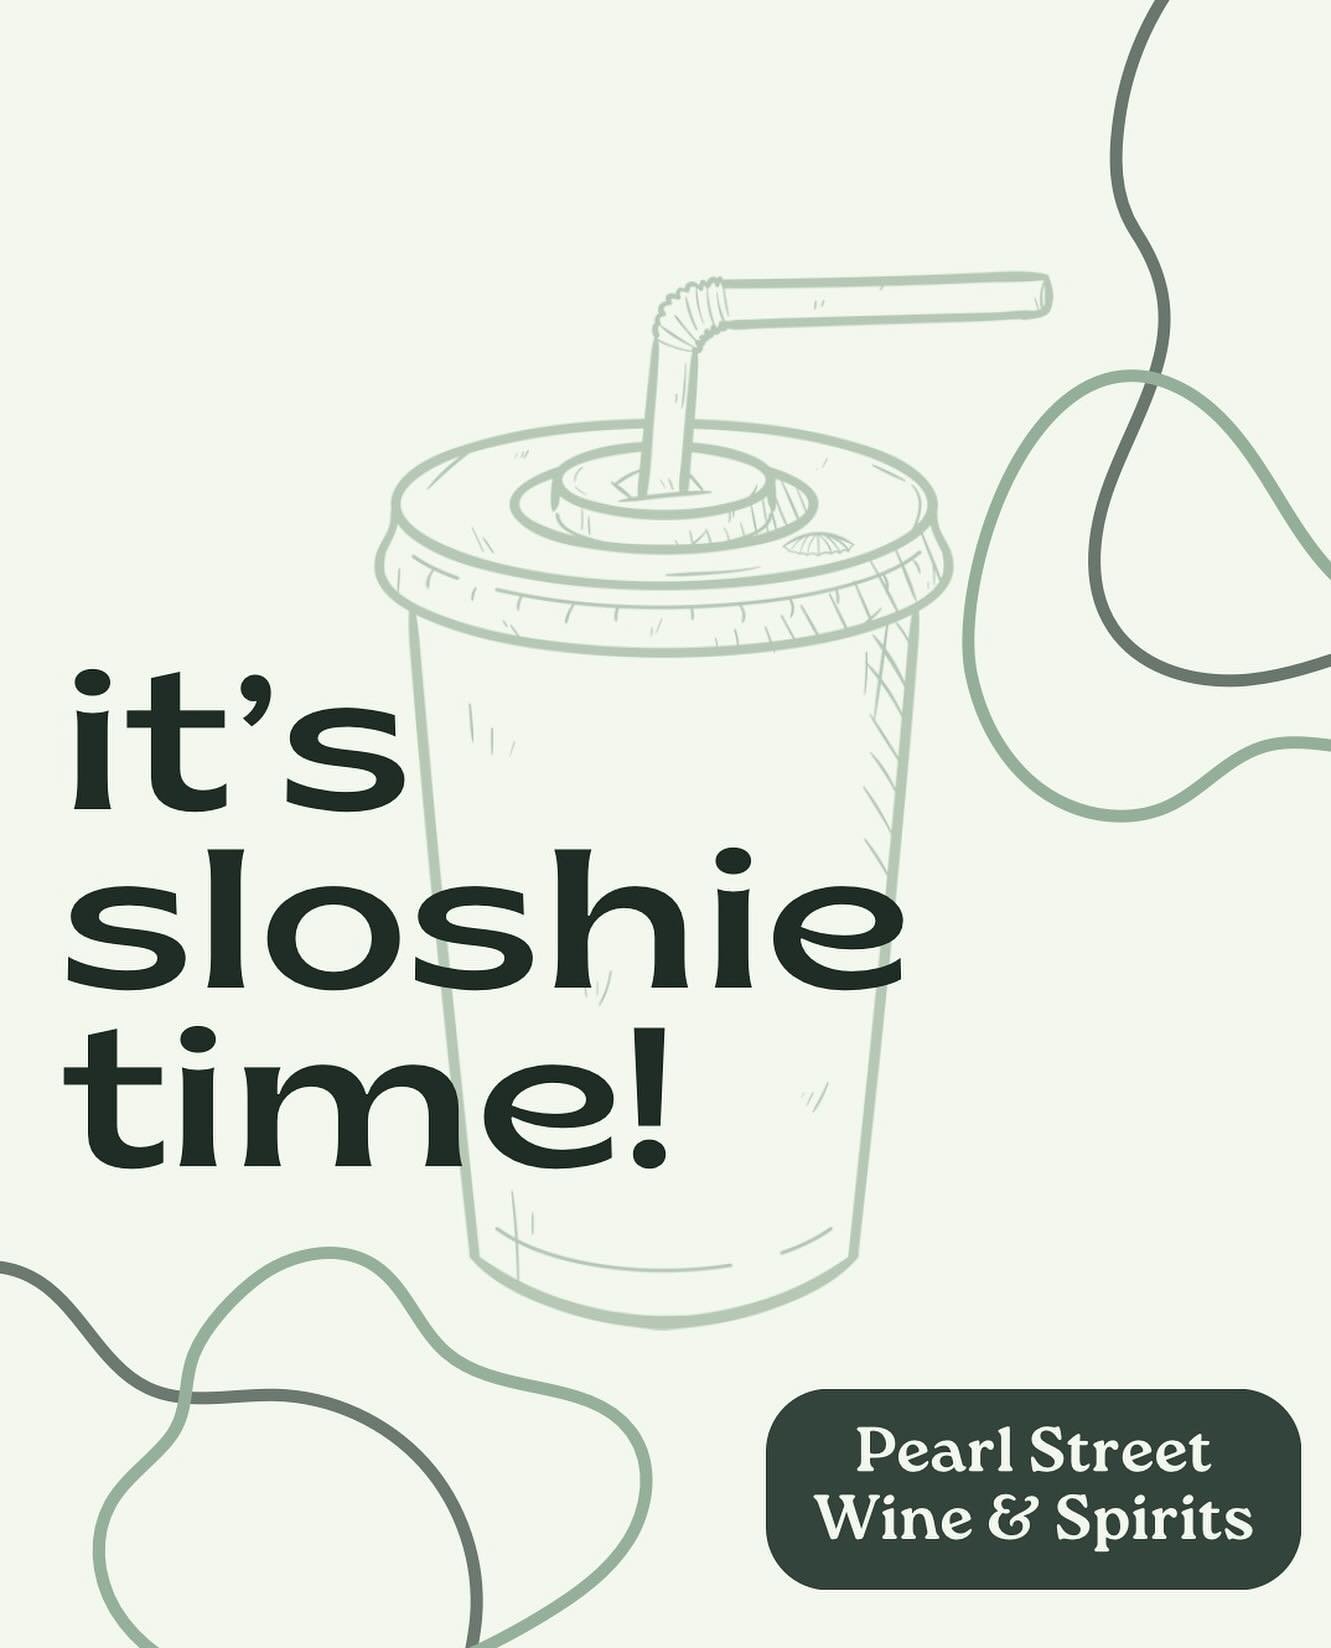 Alas! We&rsquo;re serving up sloshies! Mixed with fresh organic juices and local bitters! #sloshietime #pearlstreetwineandspirits